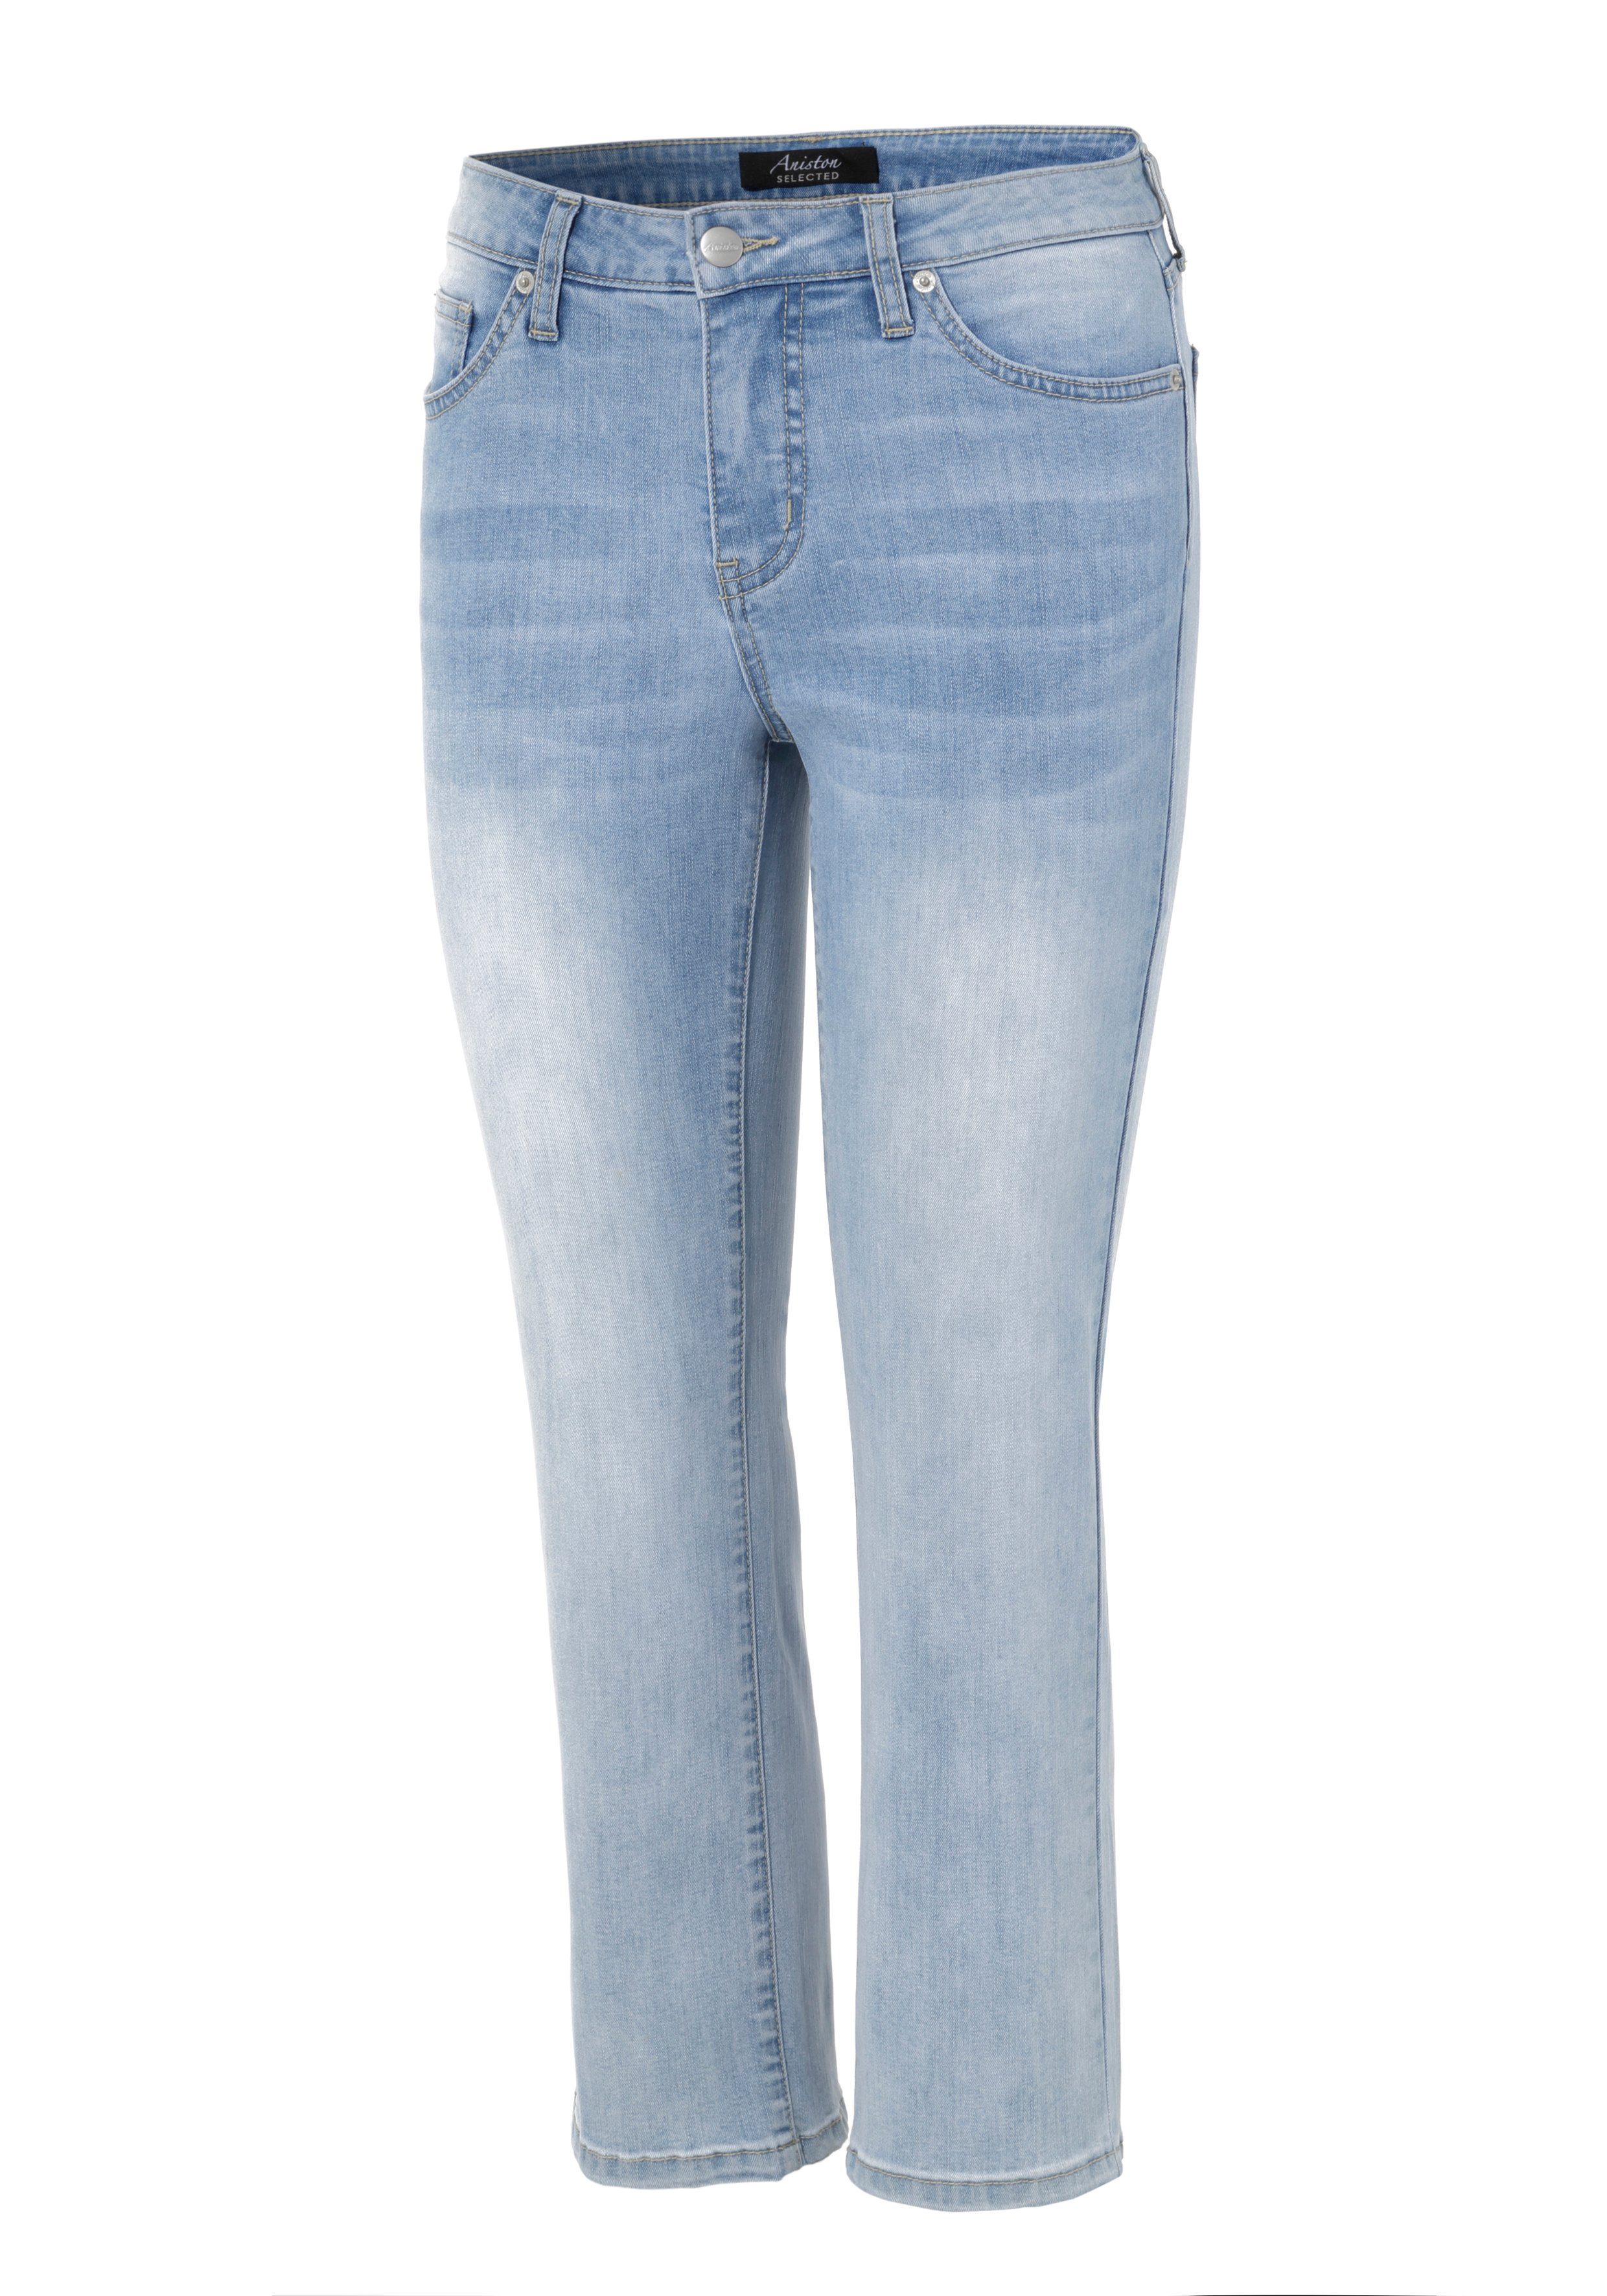 Aniston Straight-Jeans light-blue-washed cropped SELECTED in verkürzter Länge